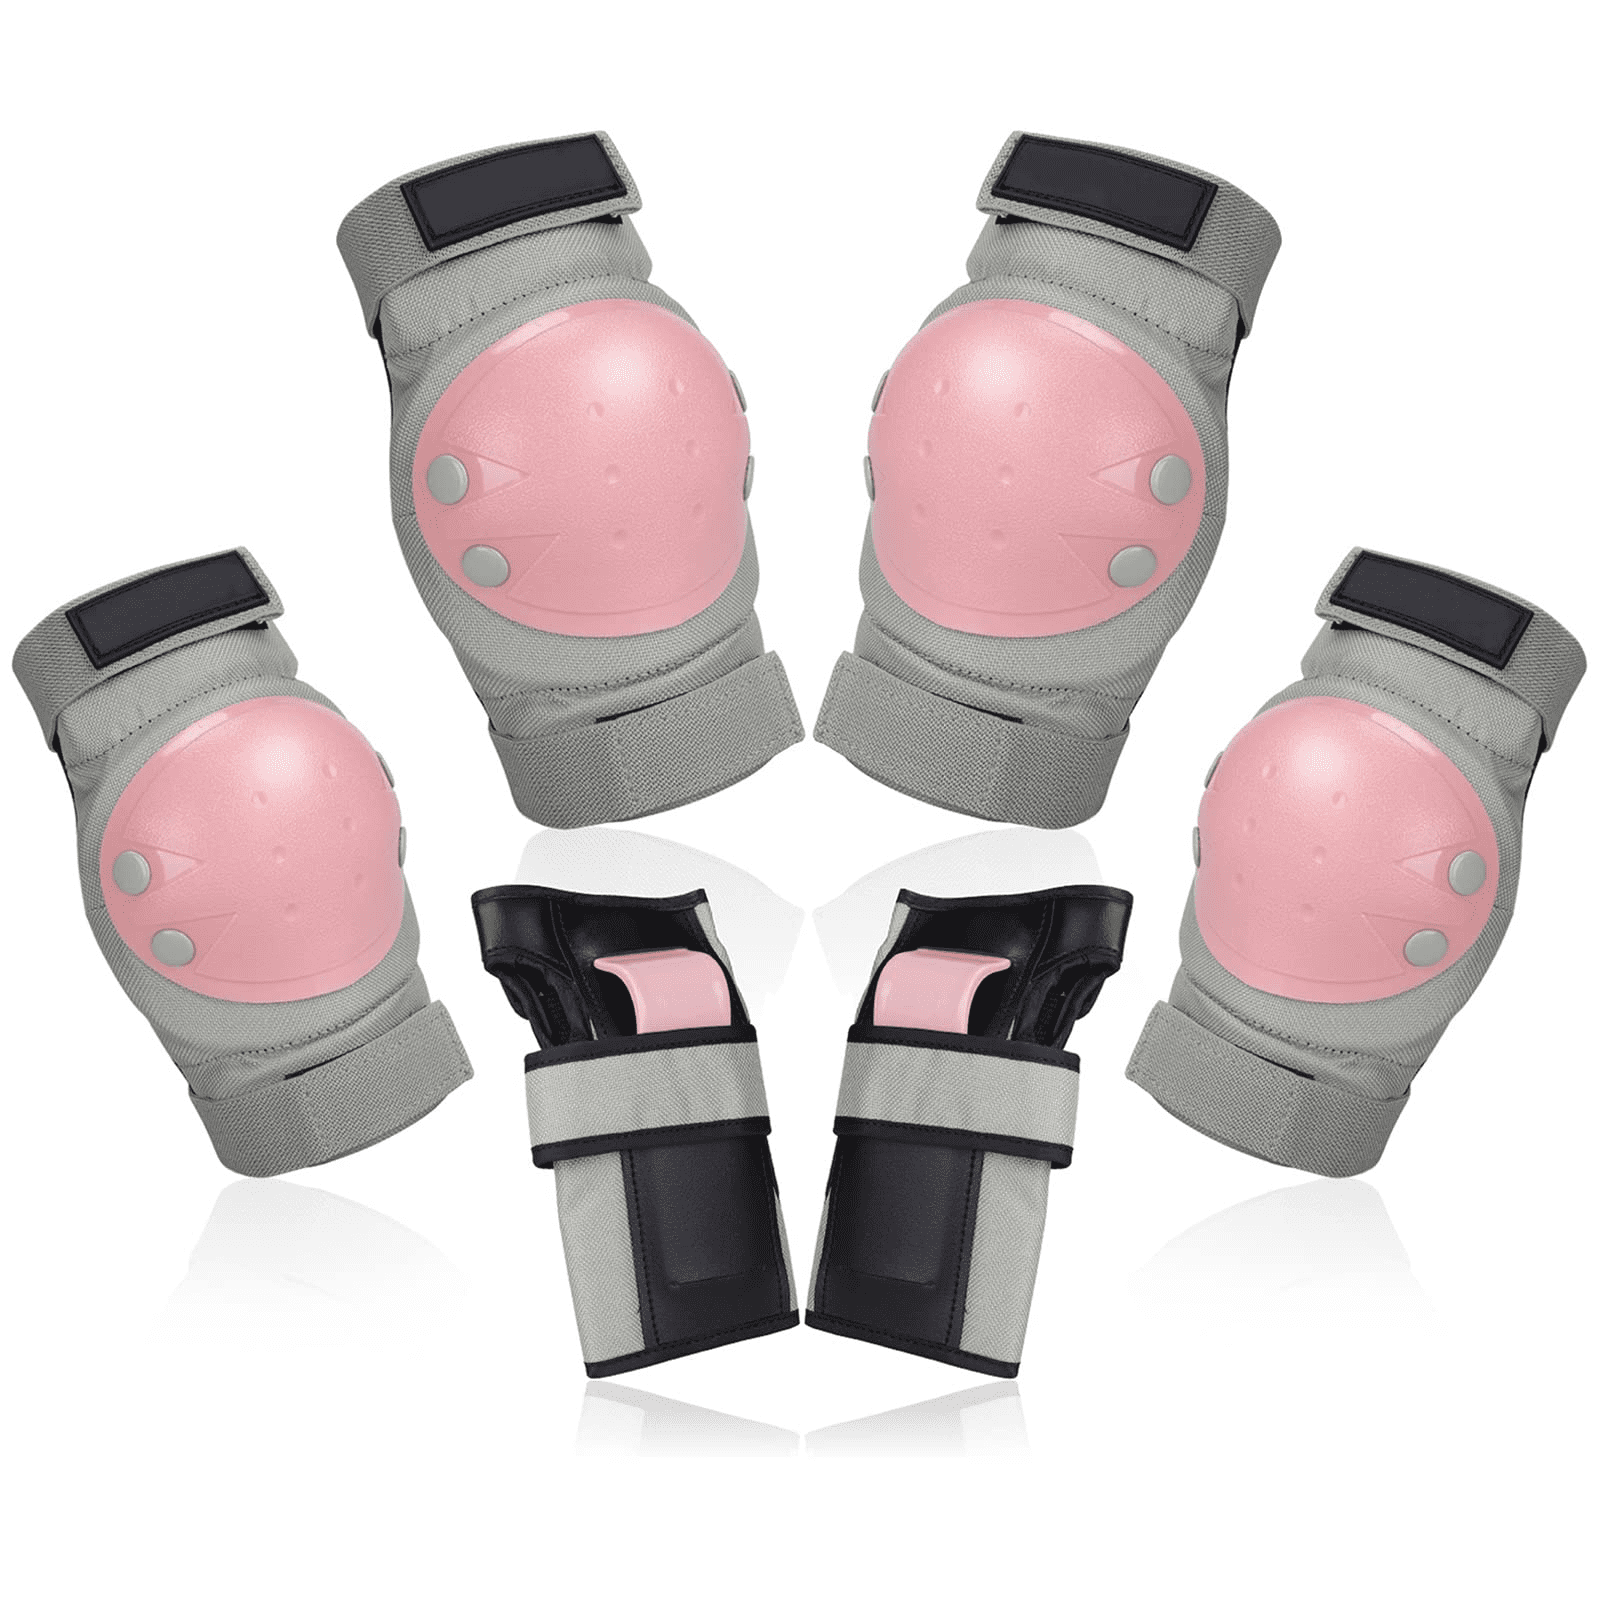 Knee Pads Set Protective Gear for Roller Skates Cycling Bike Skateboard Ventilation and Breathable Shell Personalized Hand Guard 